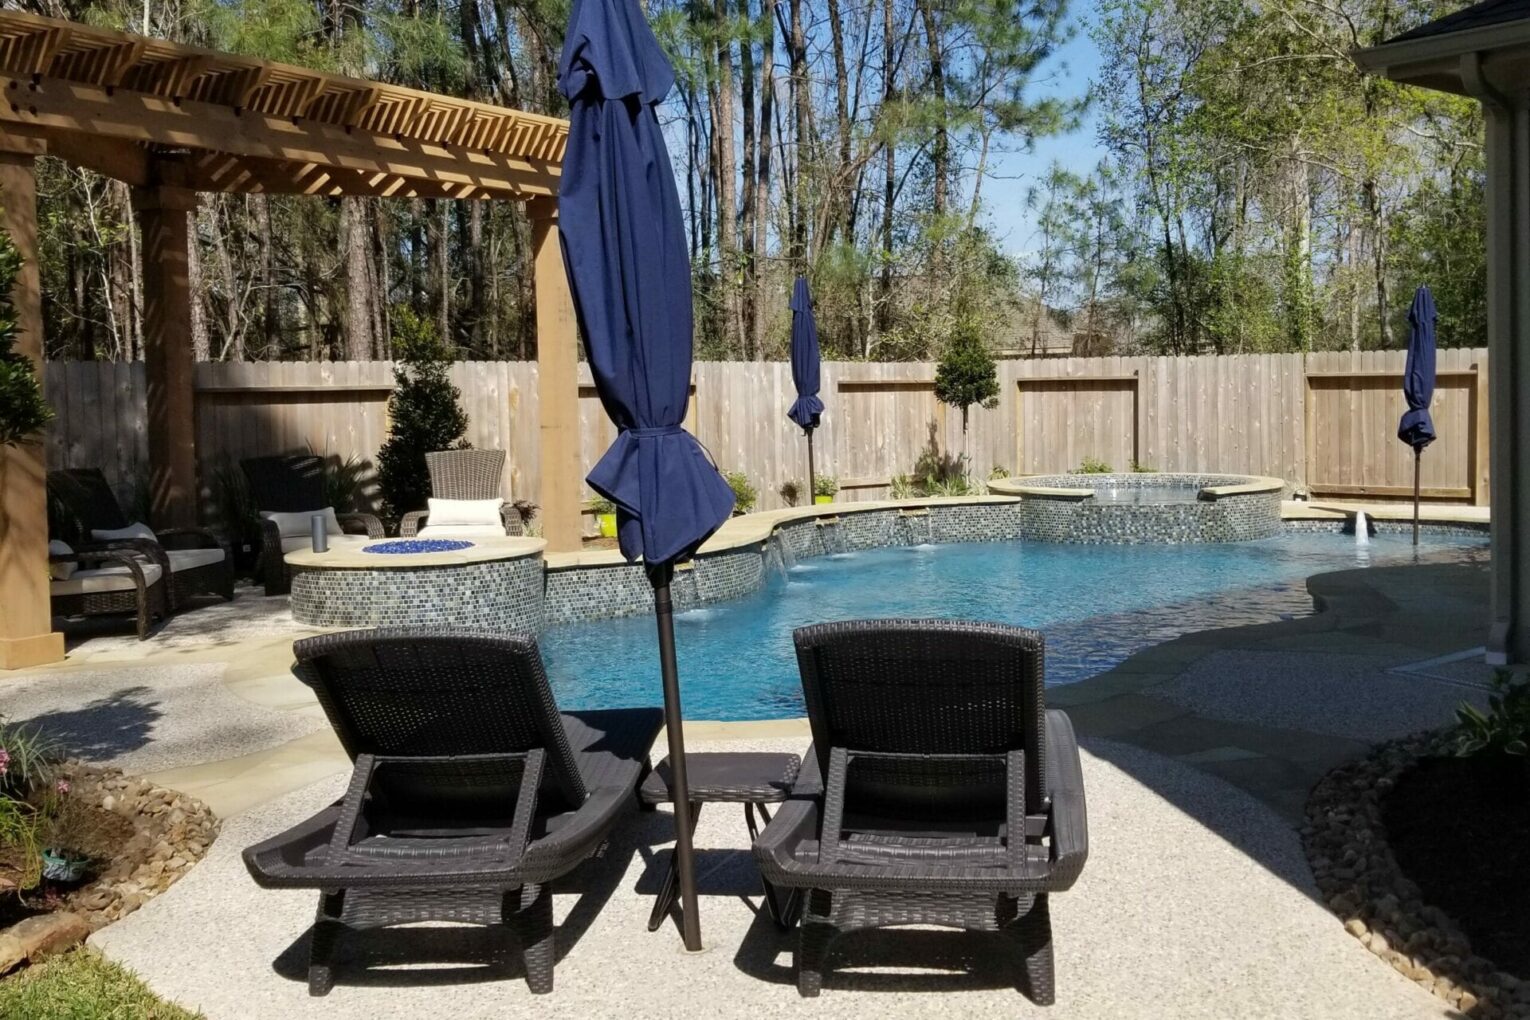 Two lounge chairs and a table in front of the pool.